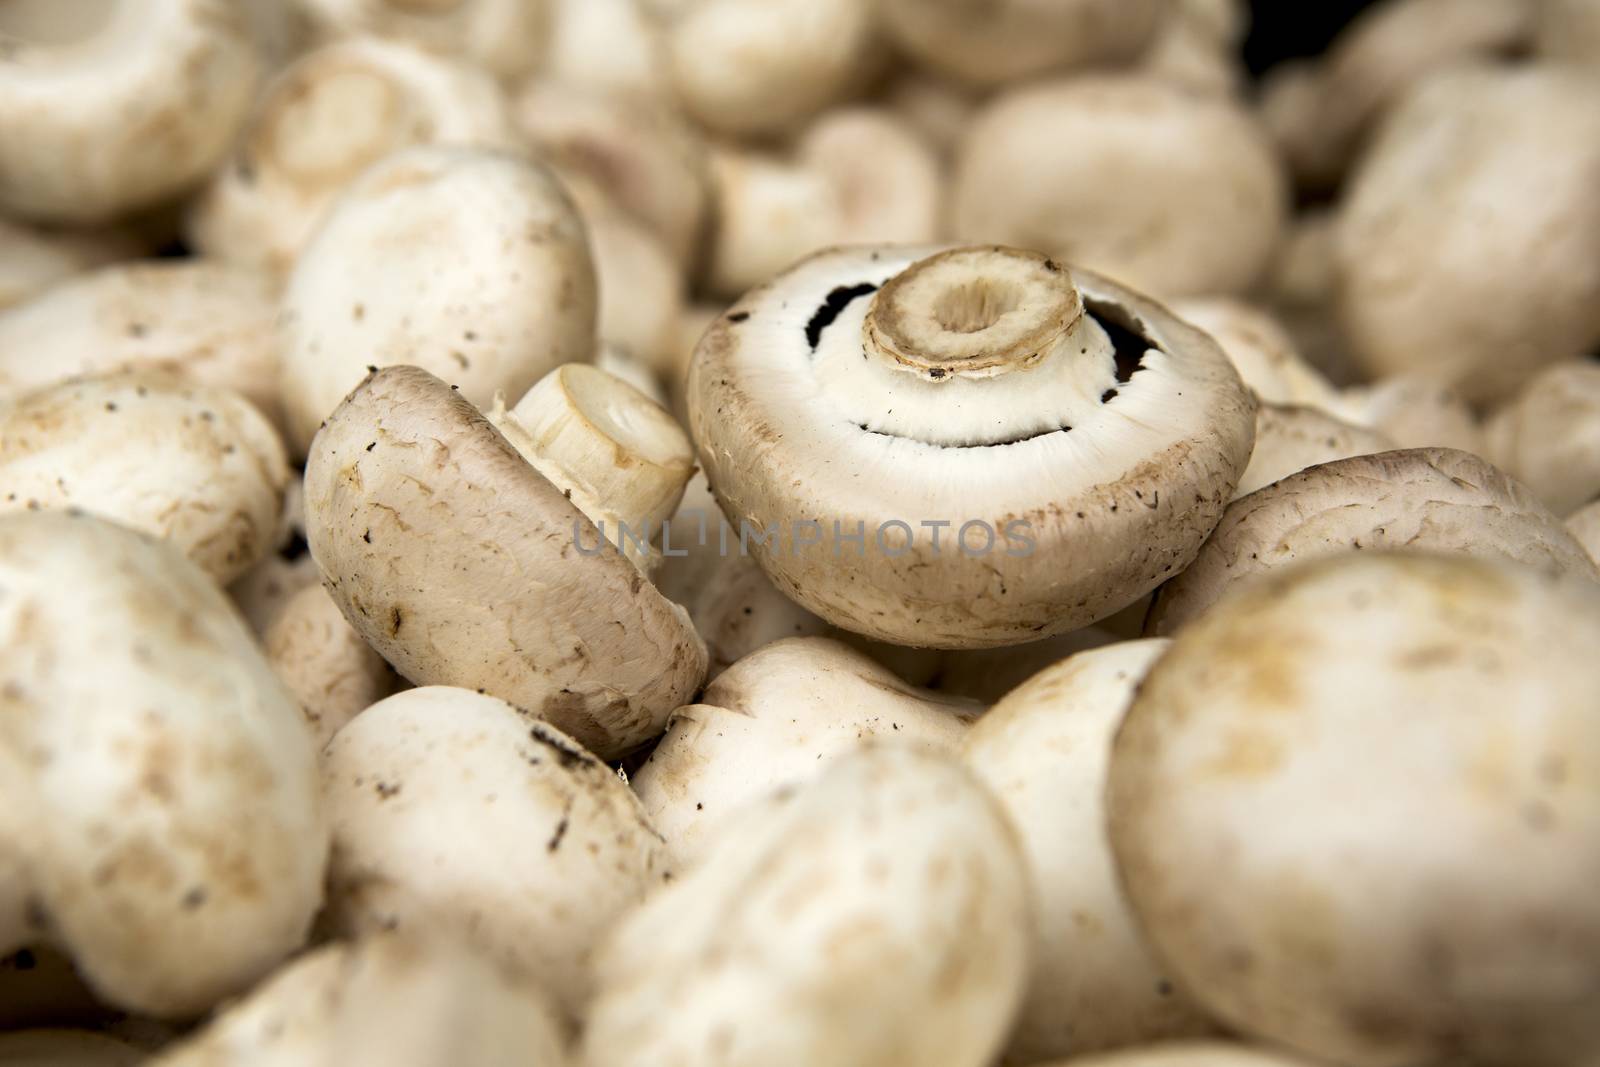 Organic mushrooms from a local market